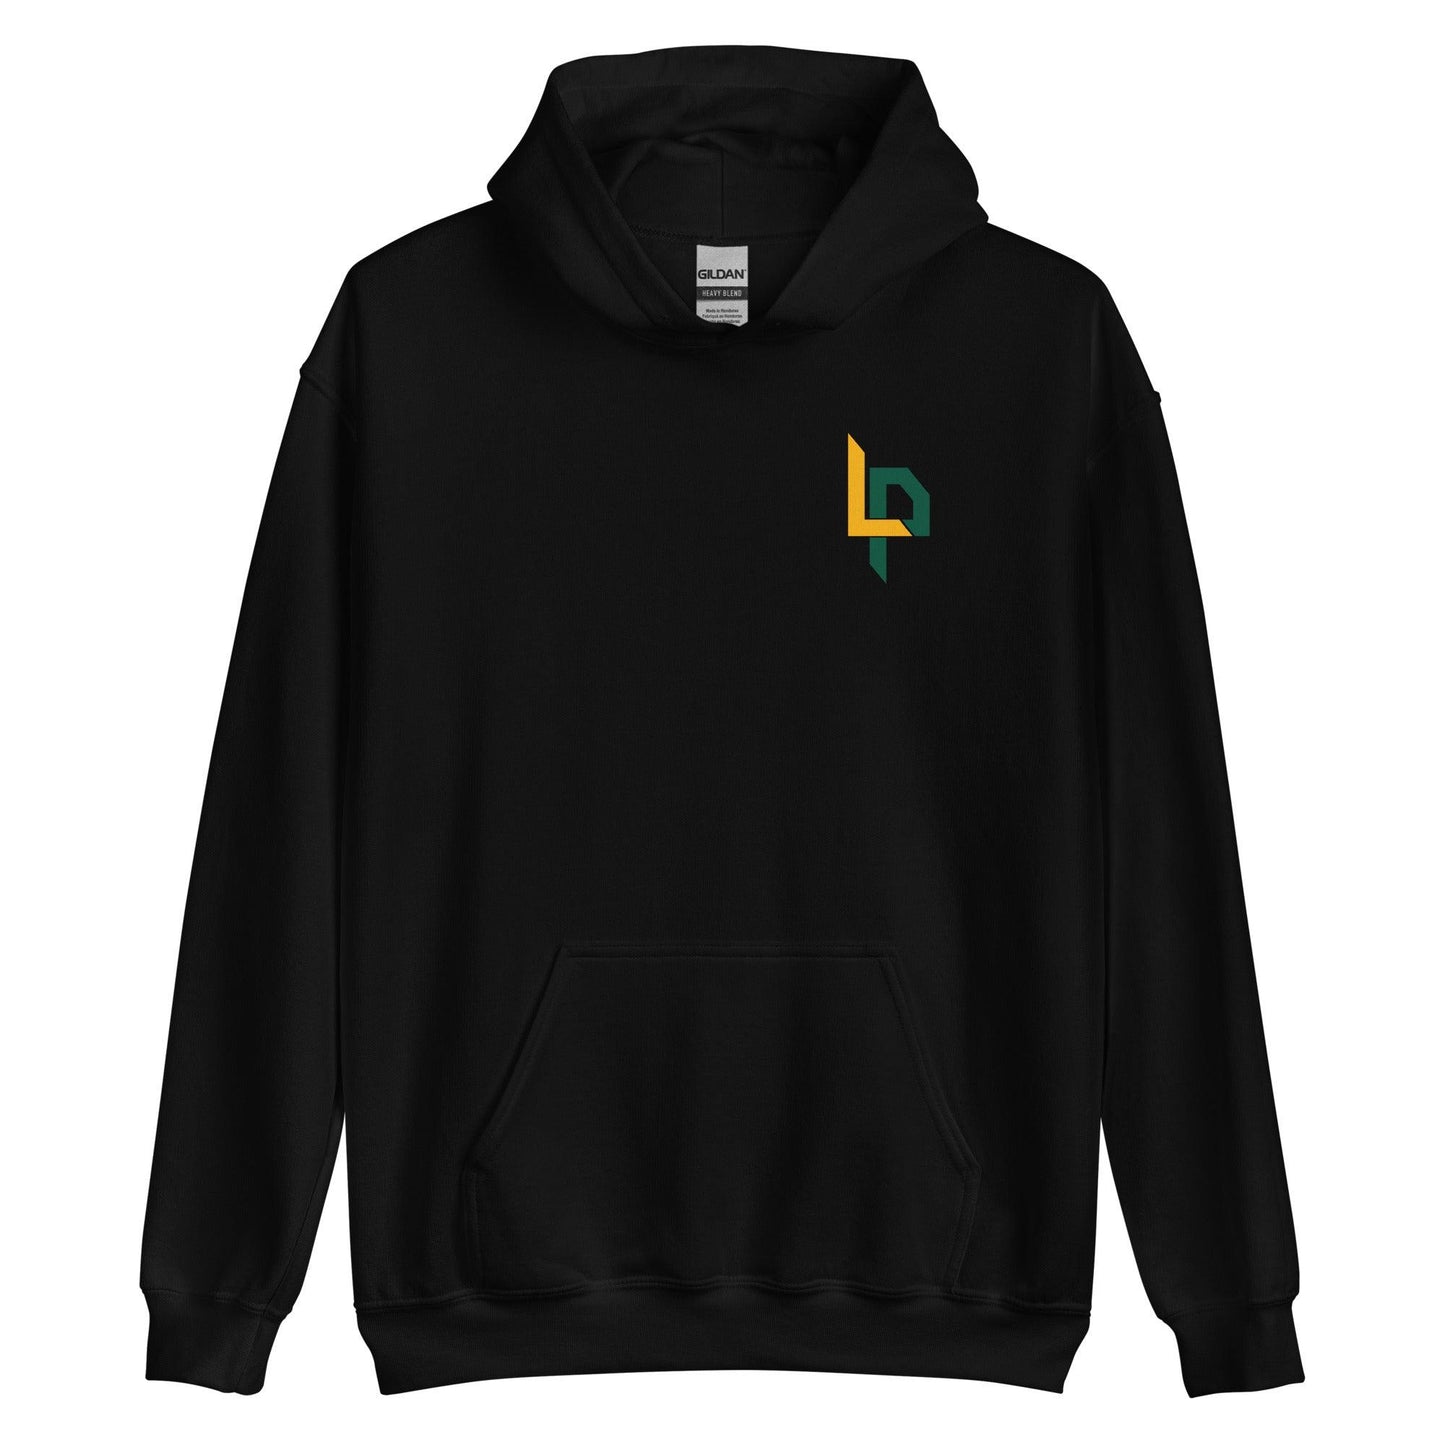 Lachlan Pitts "Essential" Hoodie - Fan Arch